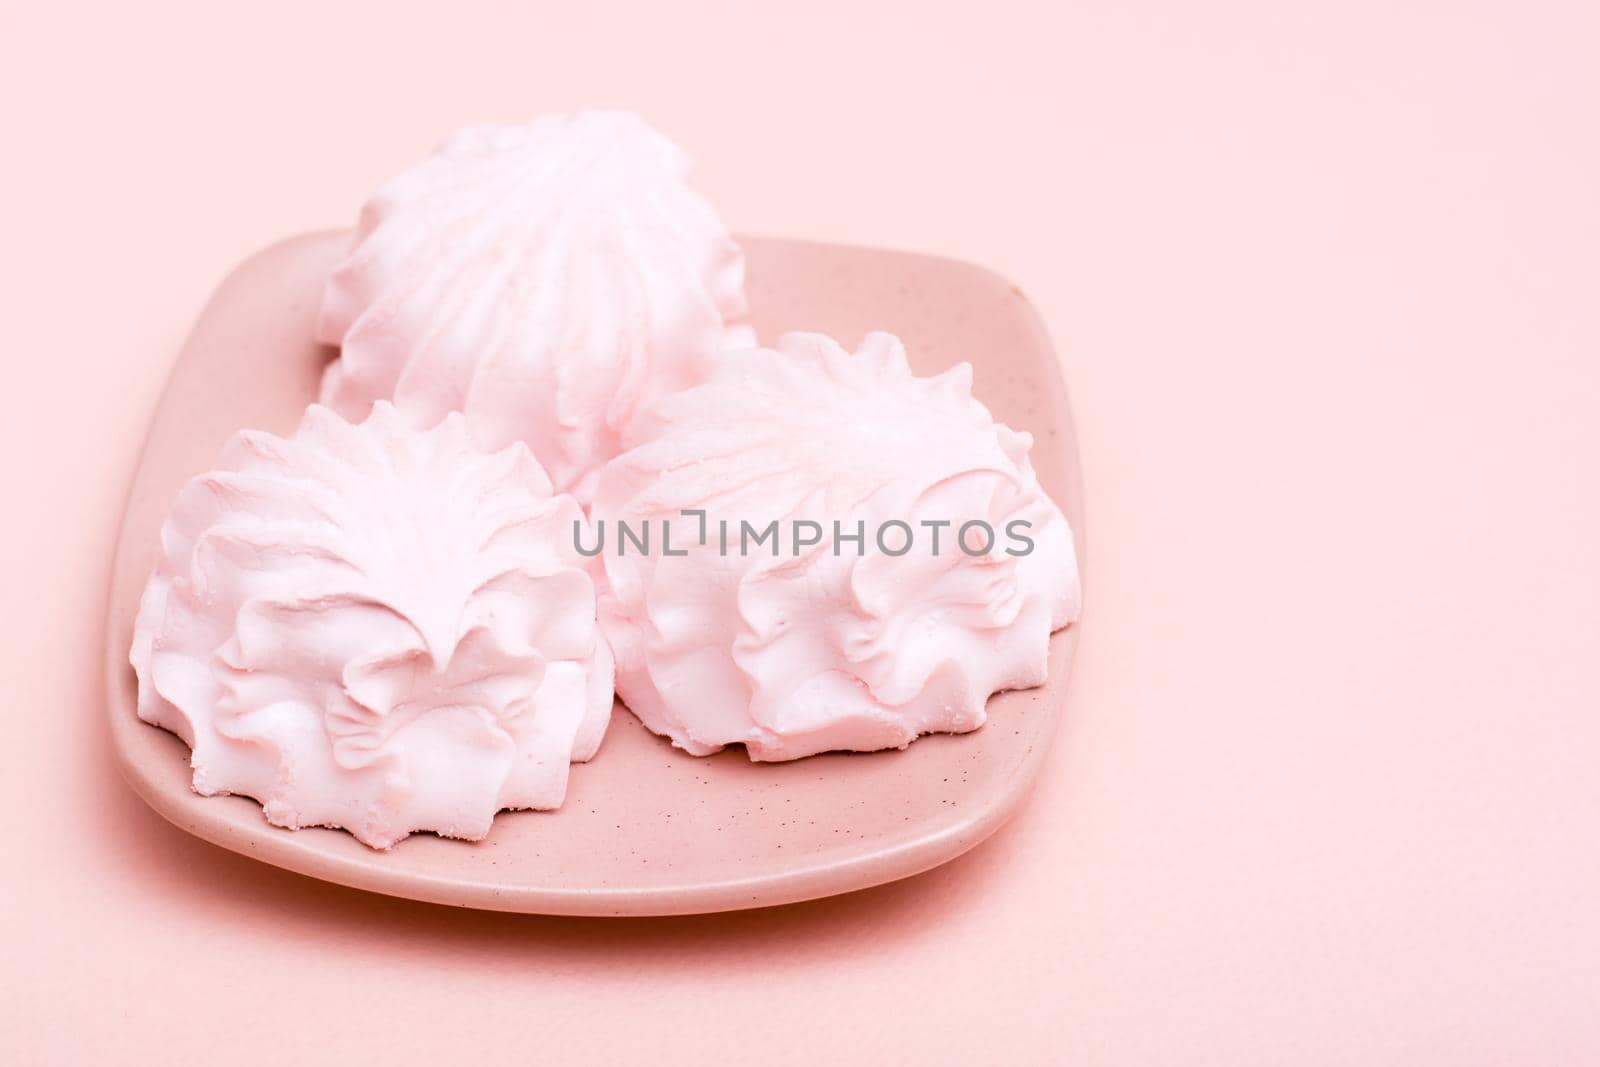 The concept is pink. Pink marshmallows on a saucer on a pink background by Aleruana